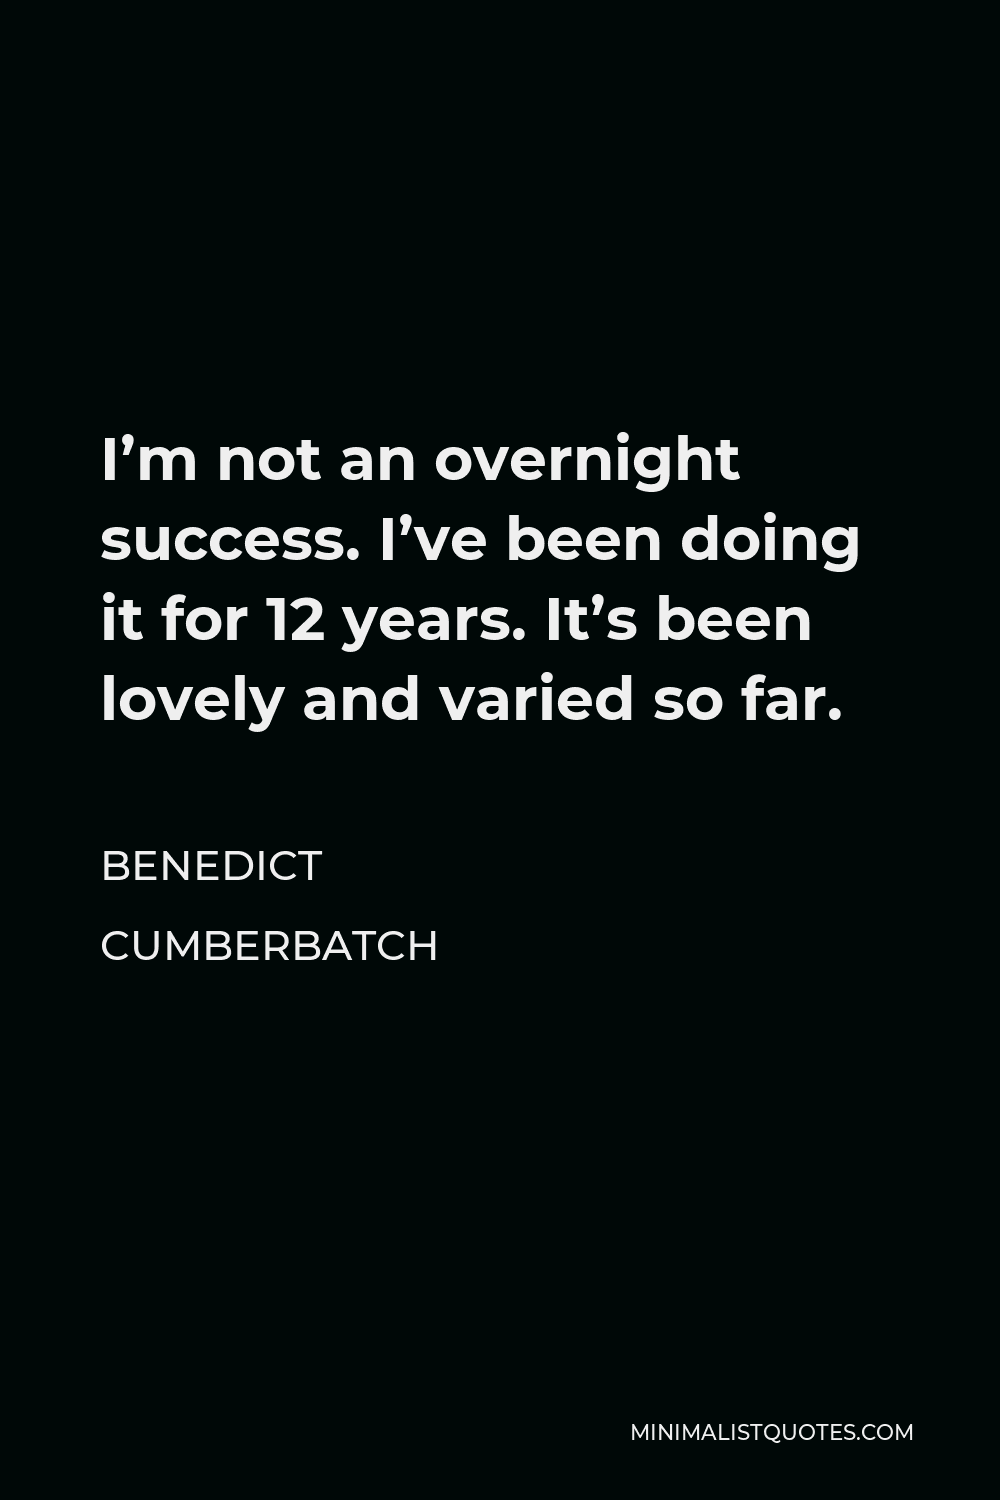 Benedict Cumberbatch Quote - I’m not an overnight success. I’ve been doing it for 12 years. It’s been lovely and varied so far.